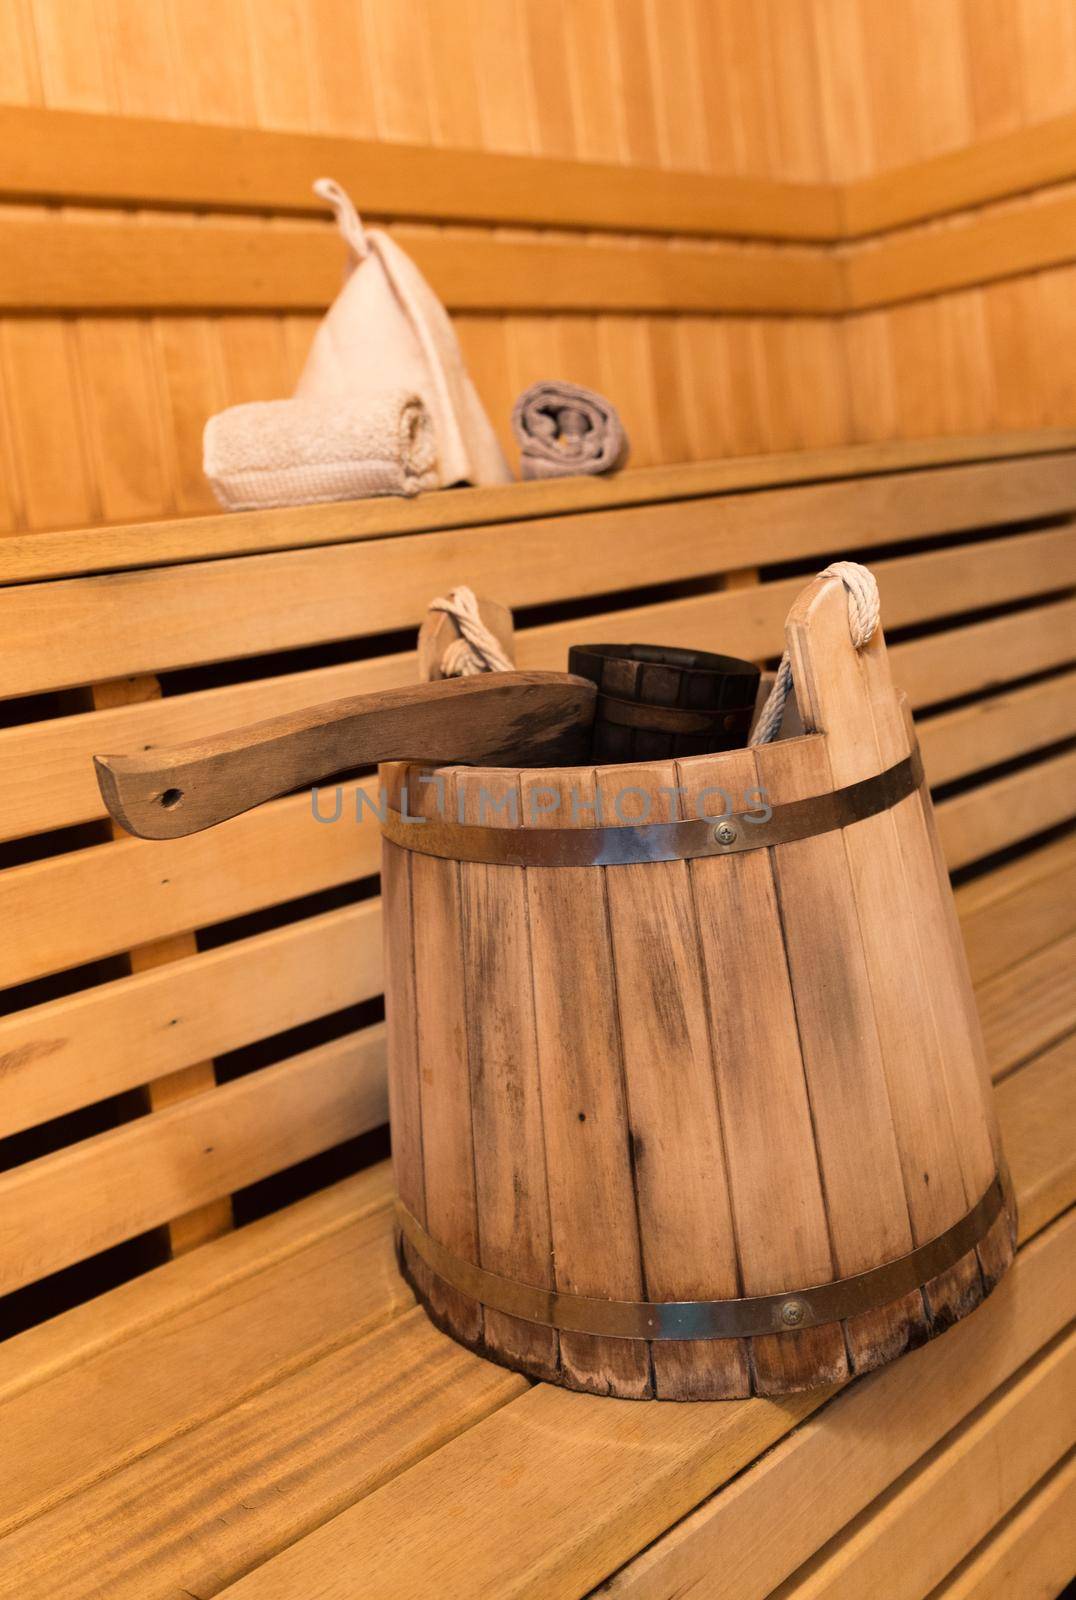 Inside view of traditional sauna with some equipment